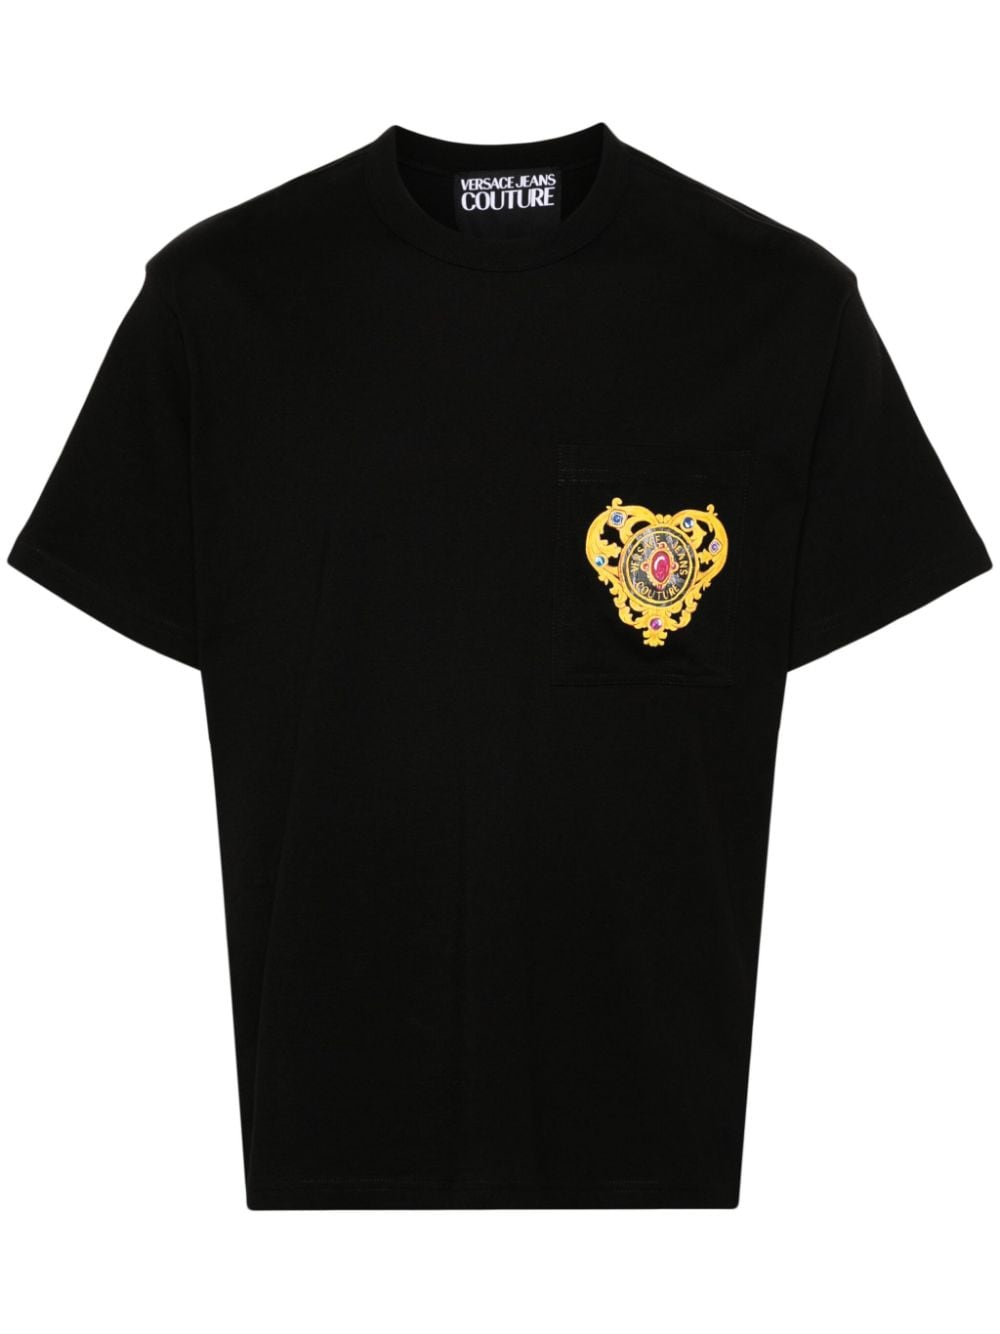 Versace Jeans Couture Heart Couture T-shirt - Black von Versace Jeans Couture